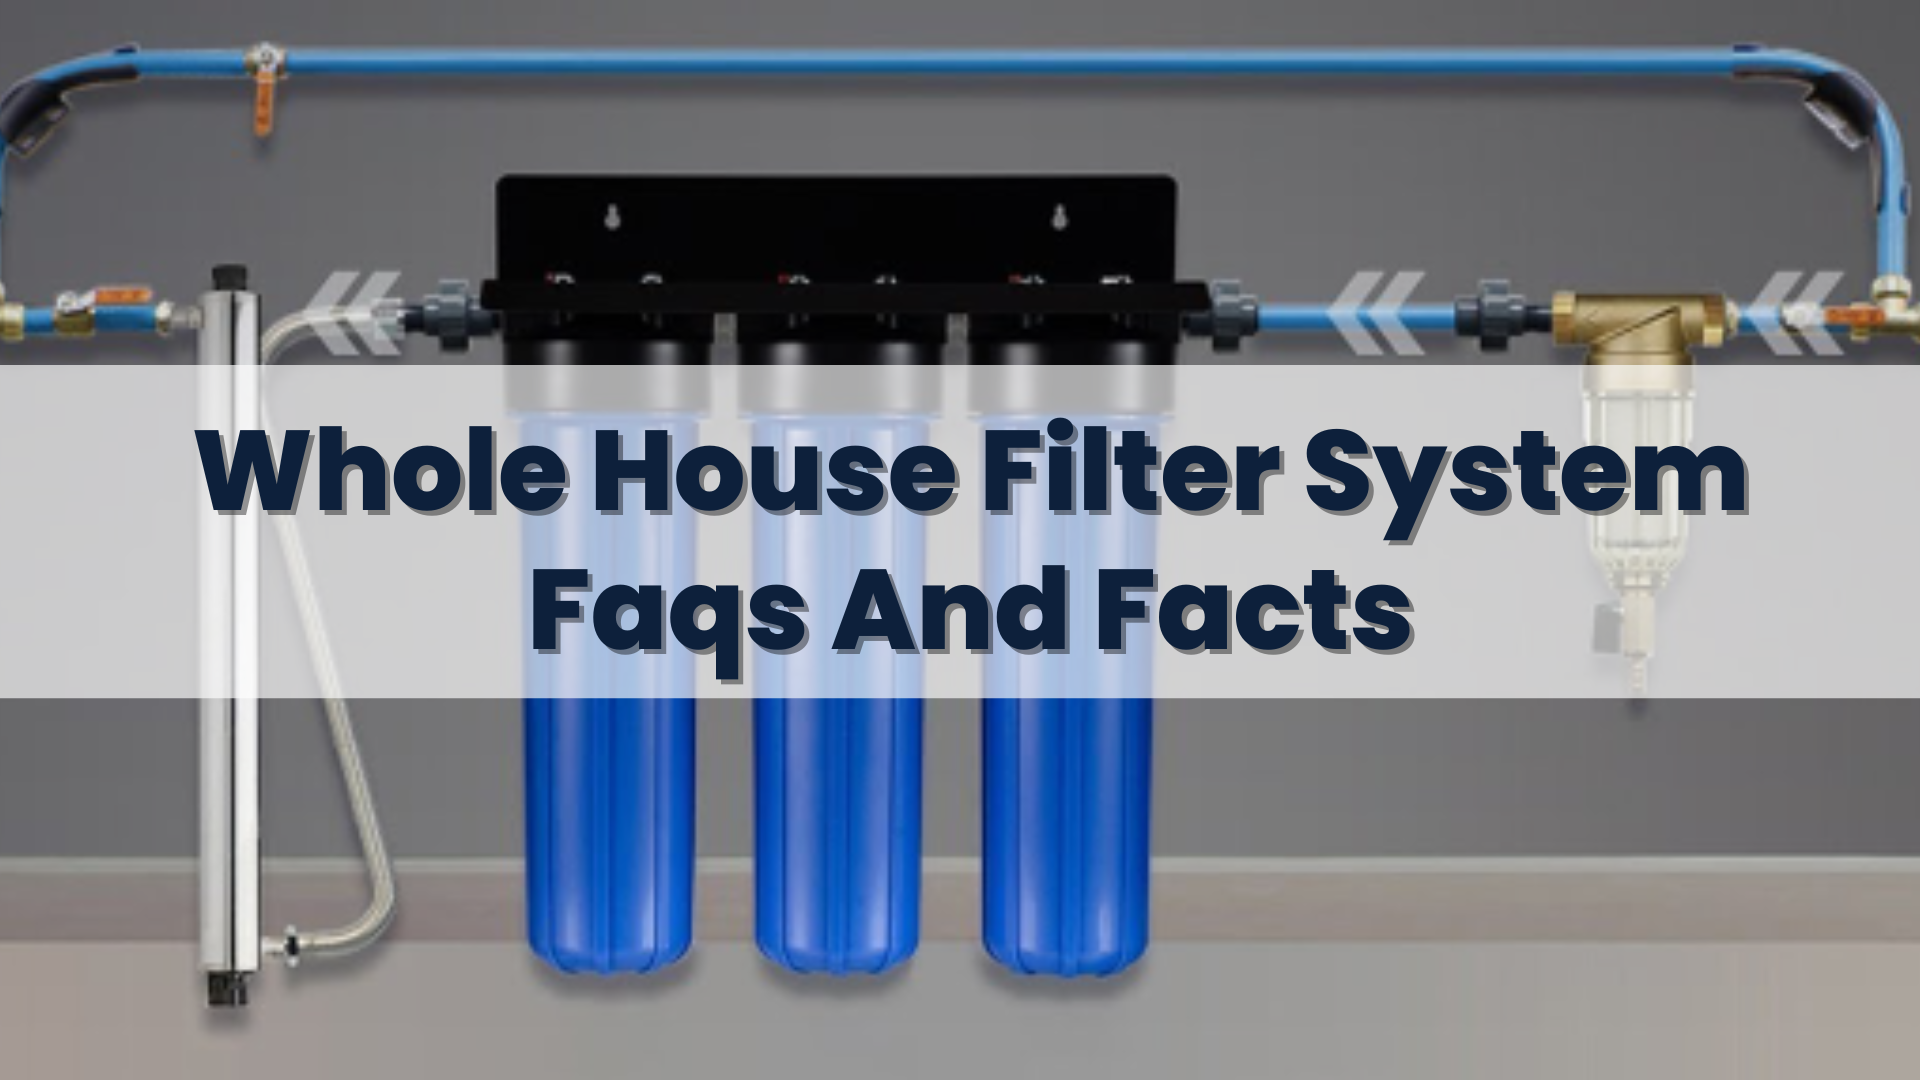 Whole House Filter System Faqs And Facts